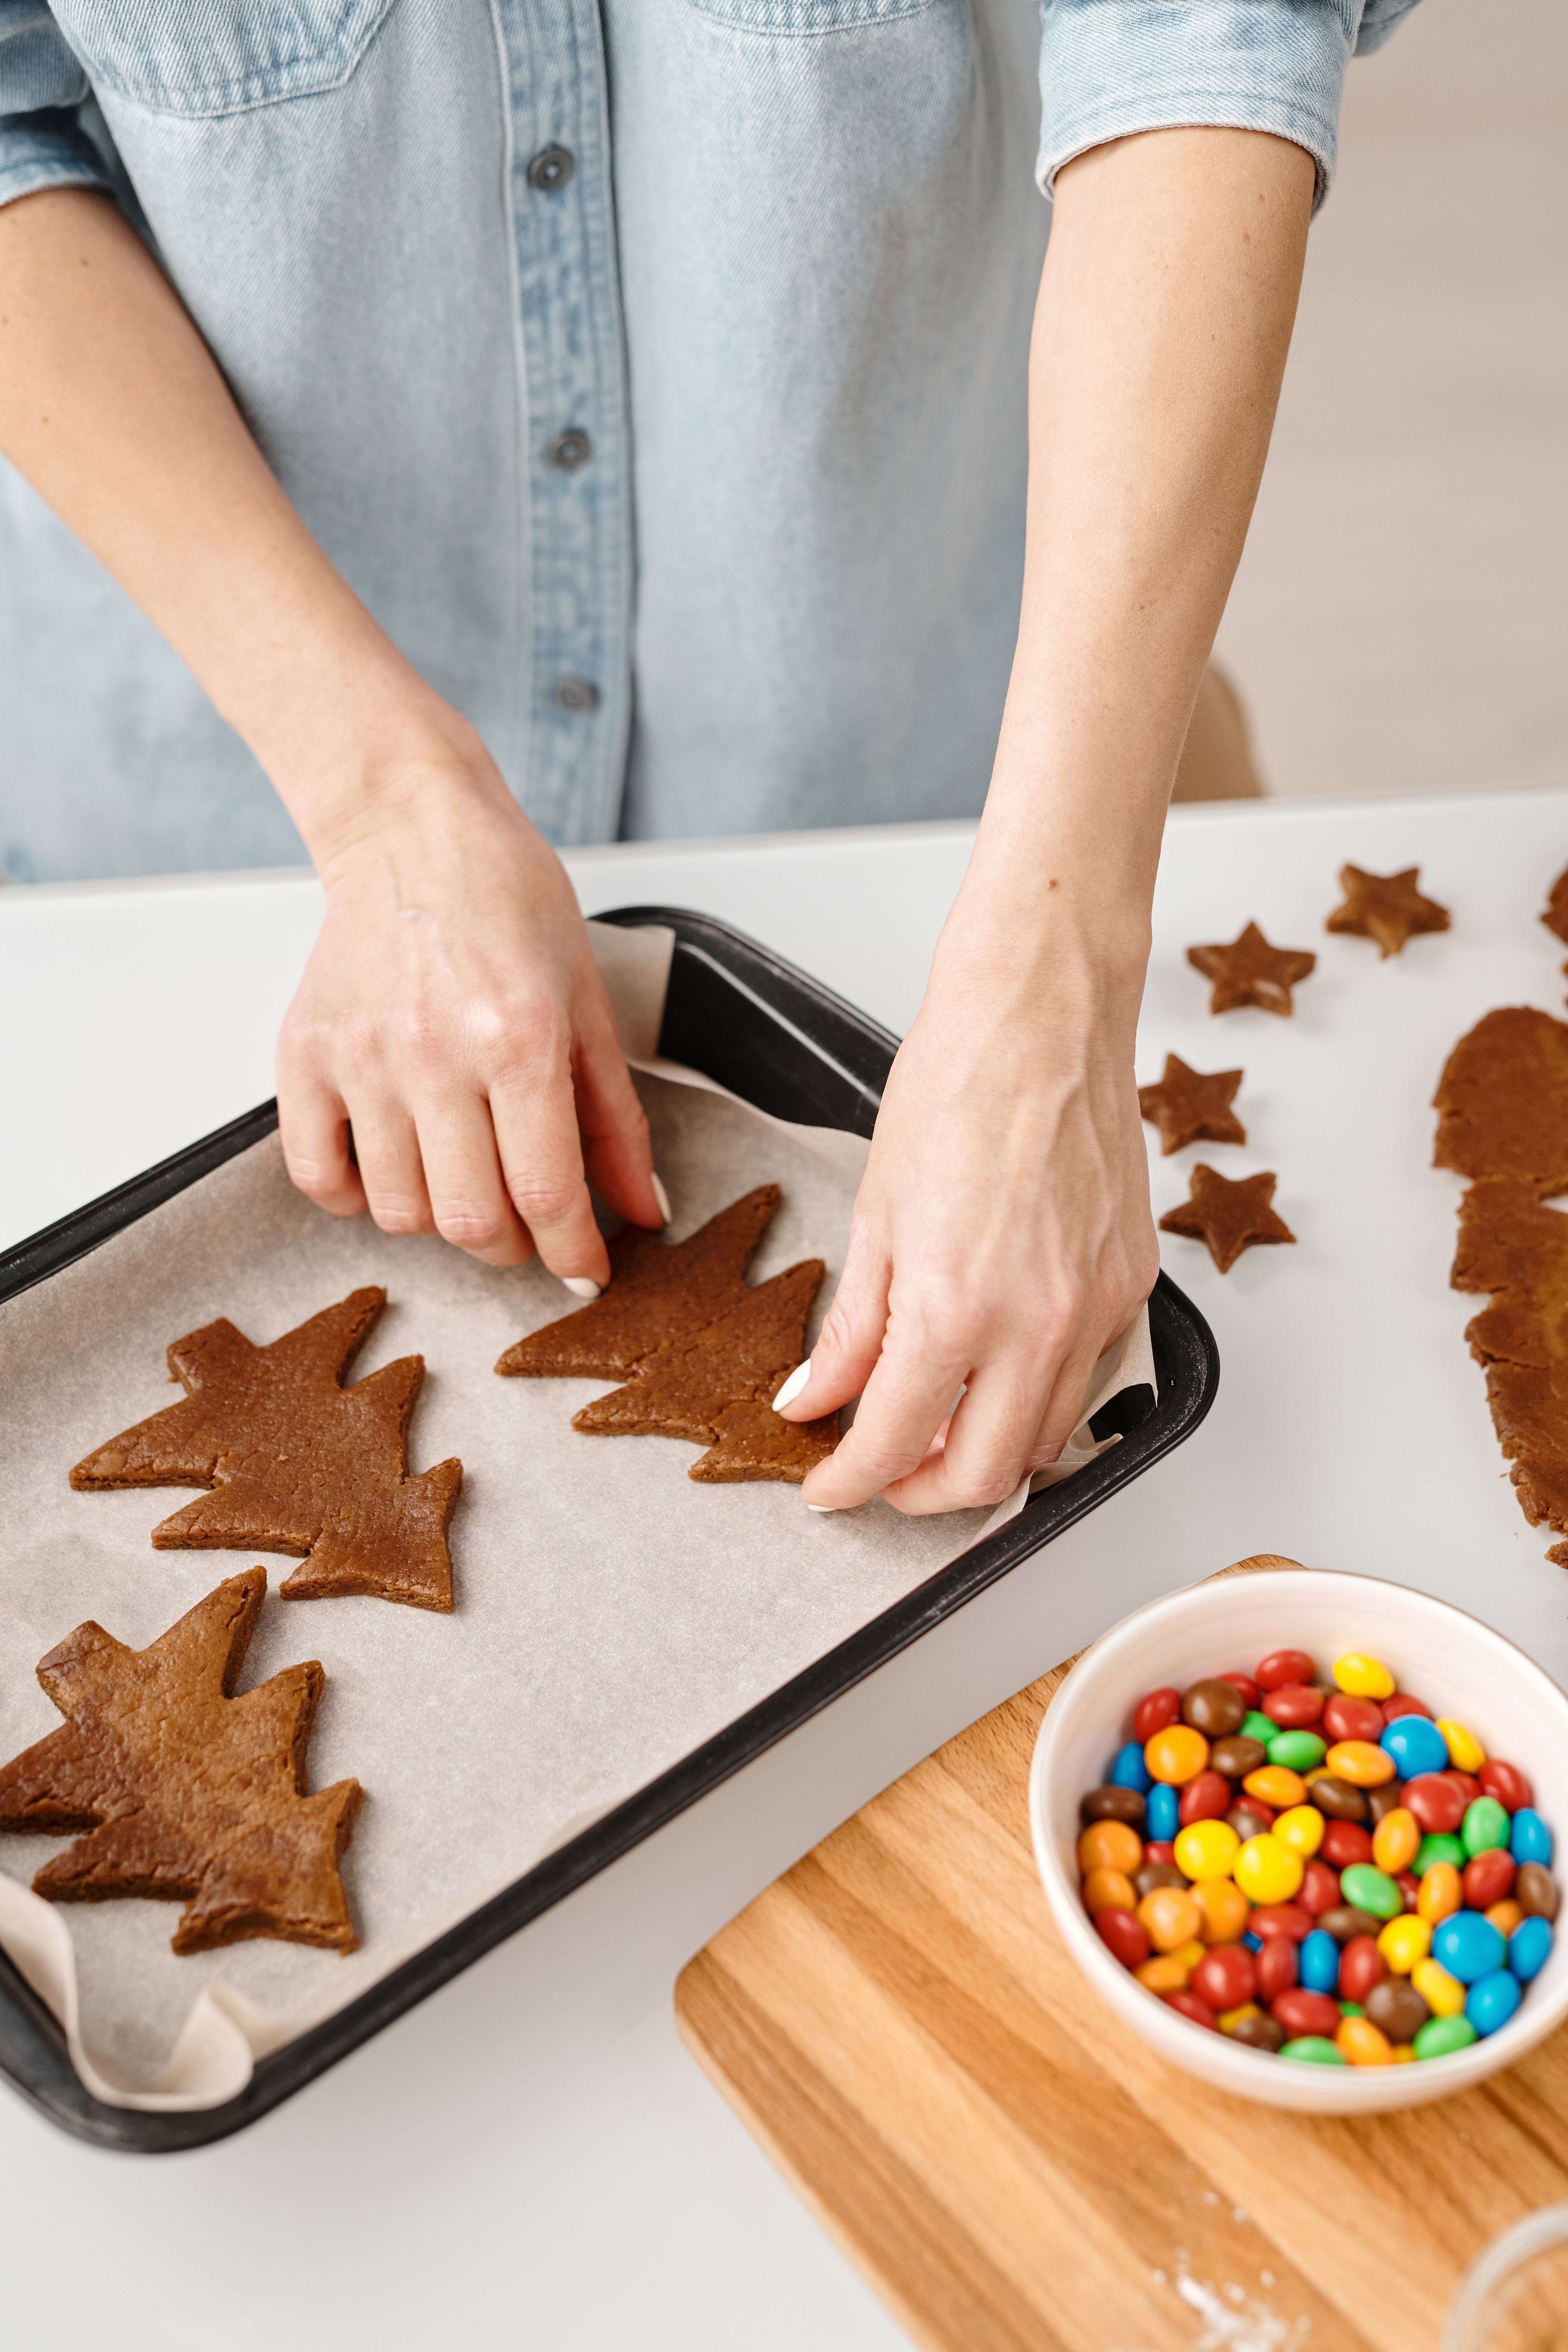 Victoria and Bertha were talking about Marco while making cookies. | Source: Pexels